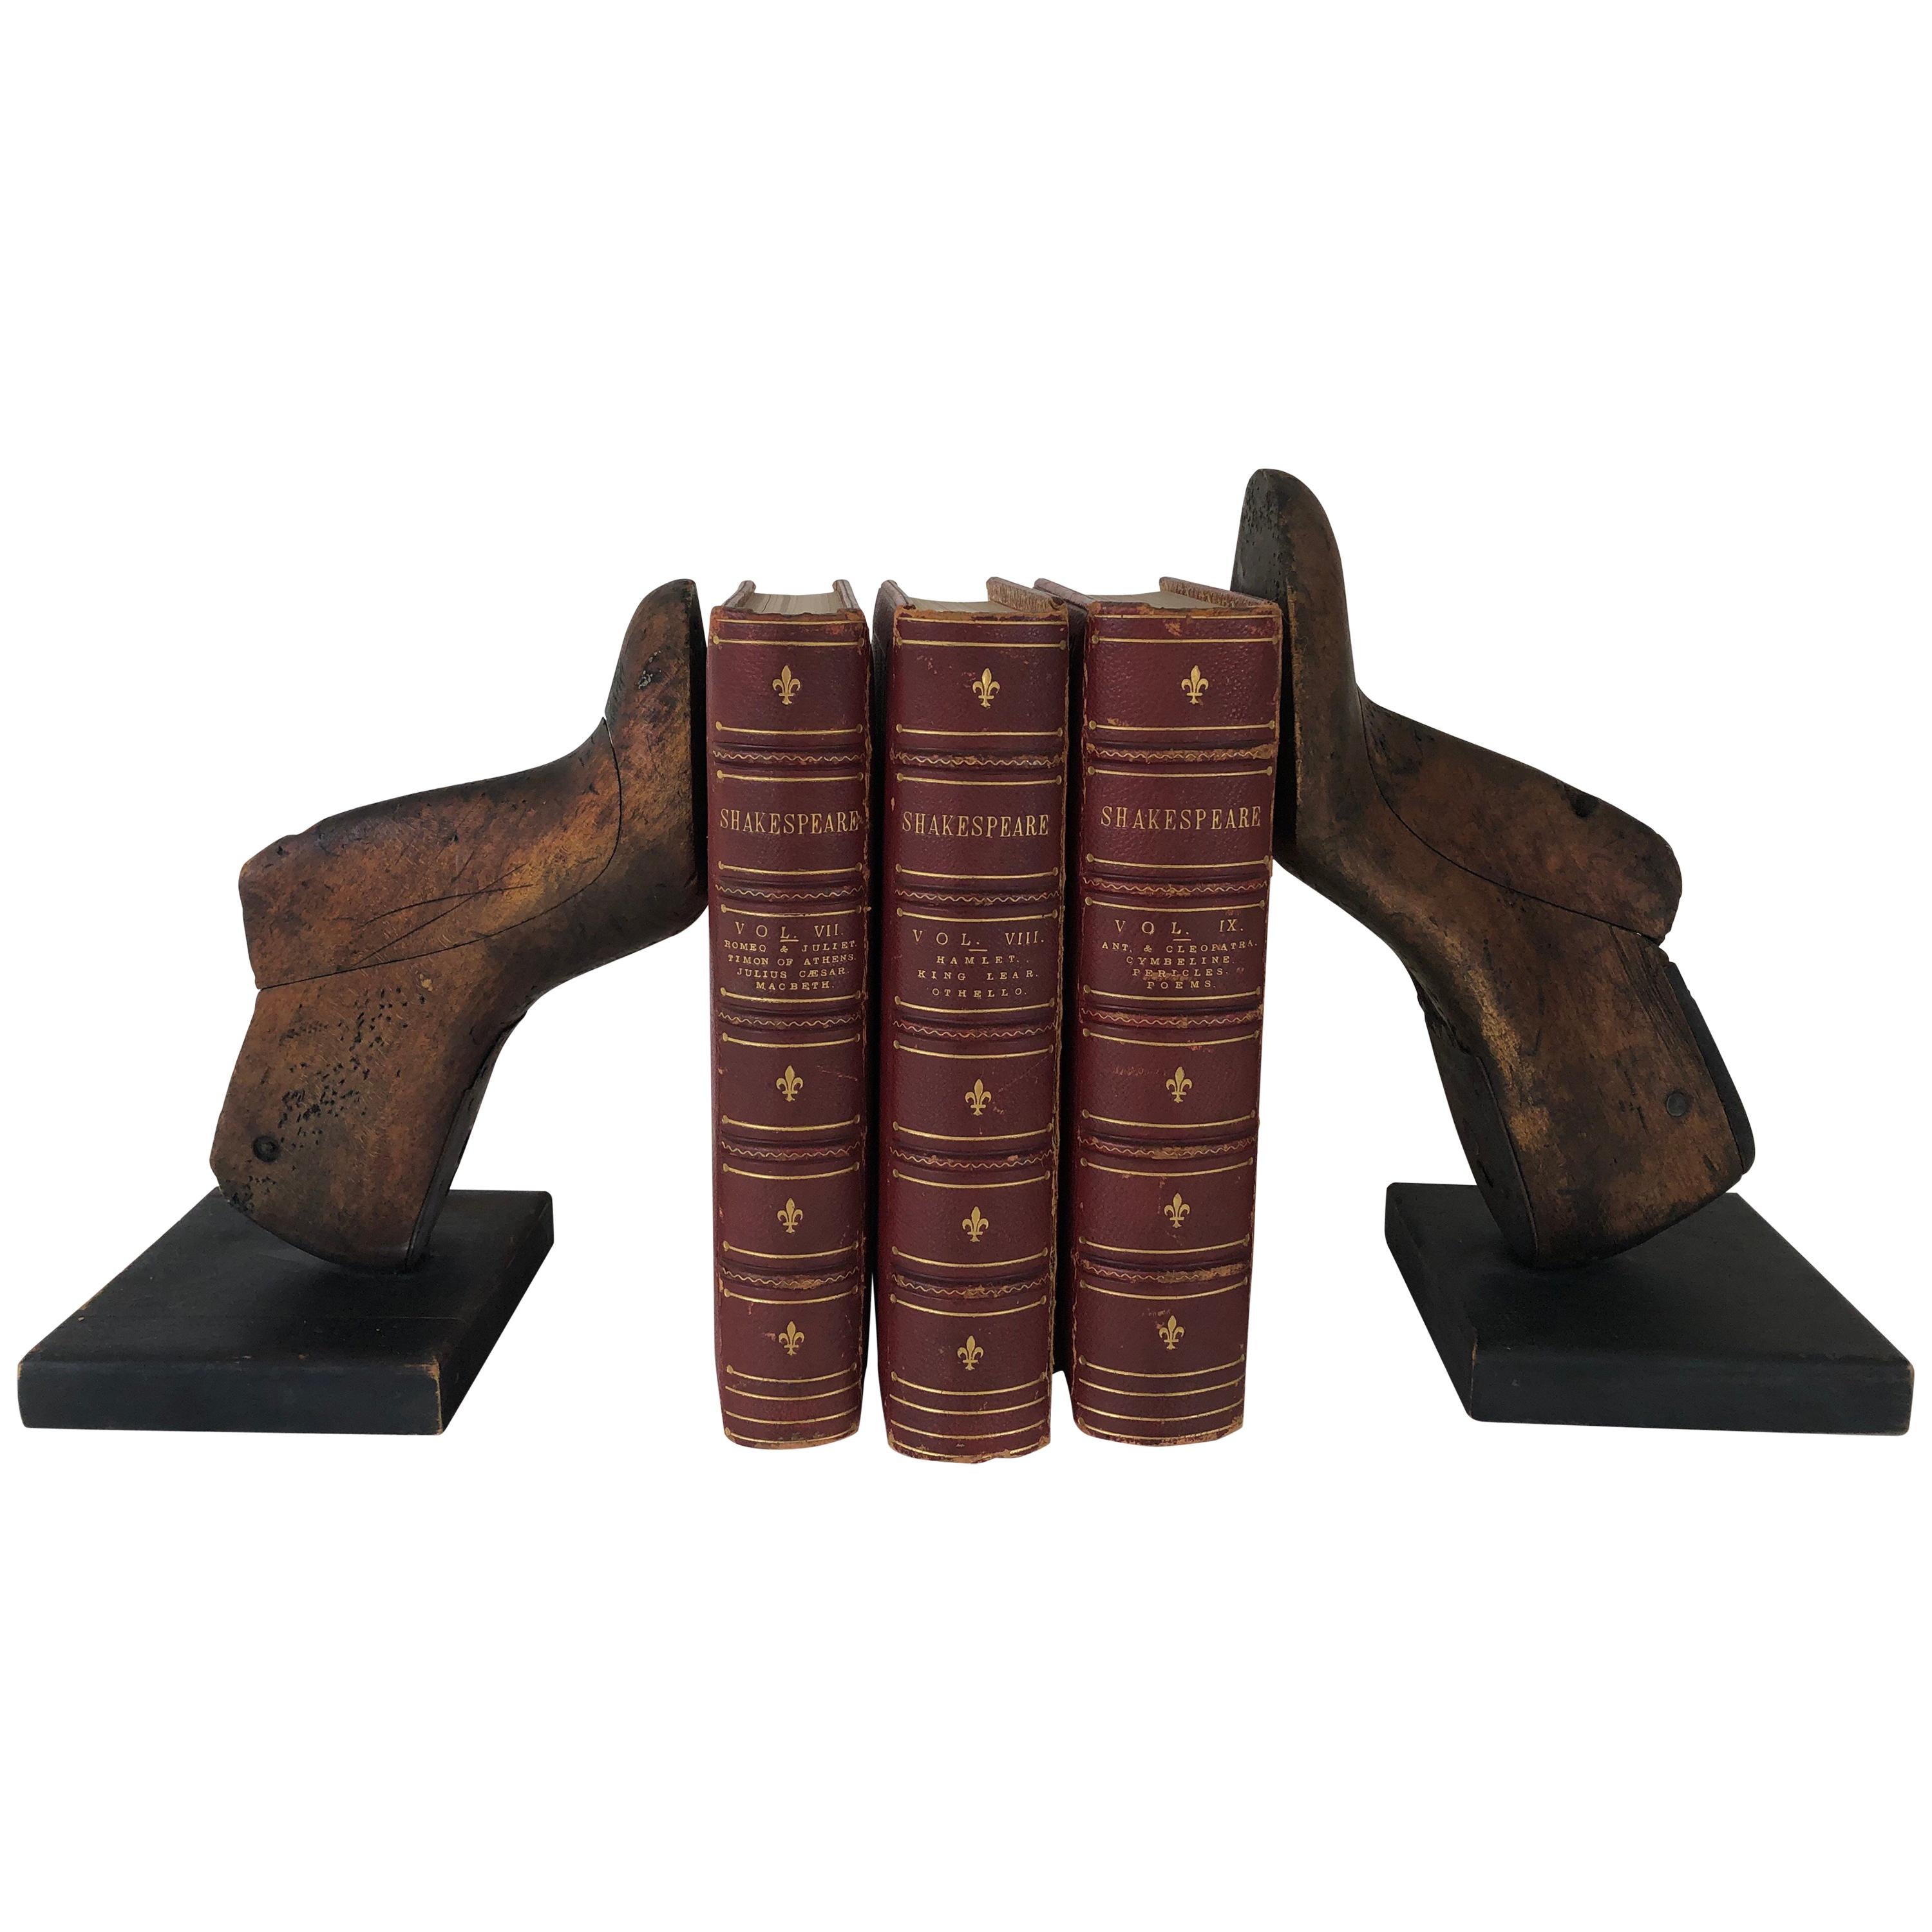 Pair of Vintage Wood Shoe Mold Bookends